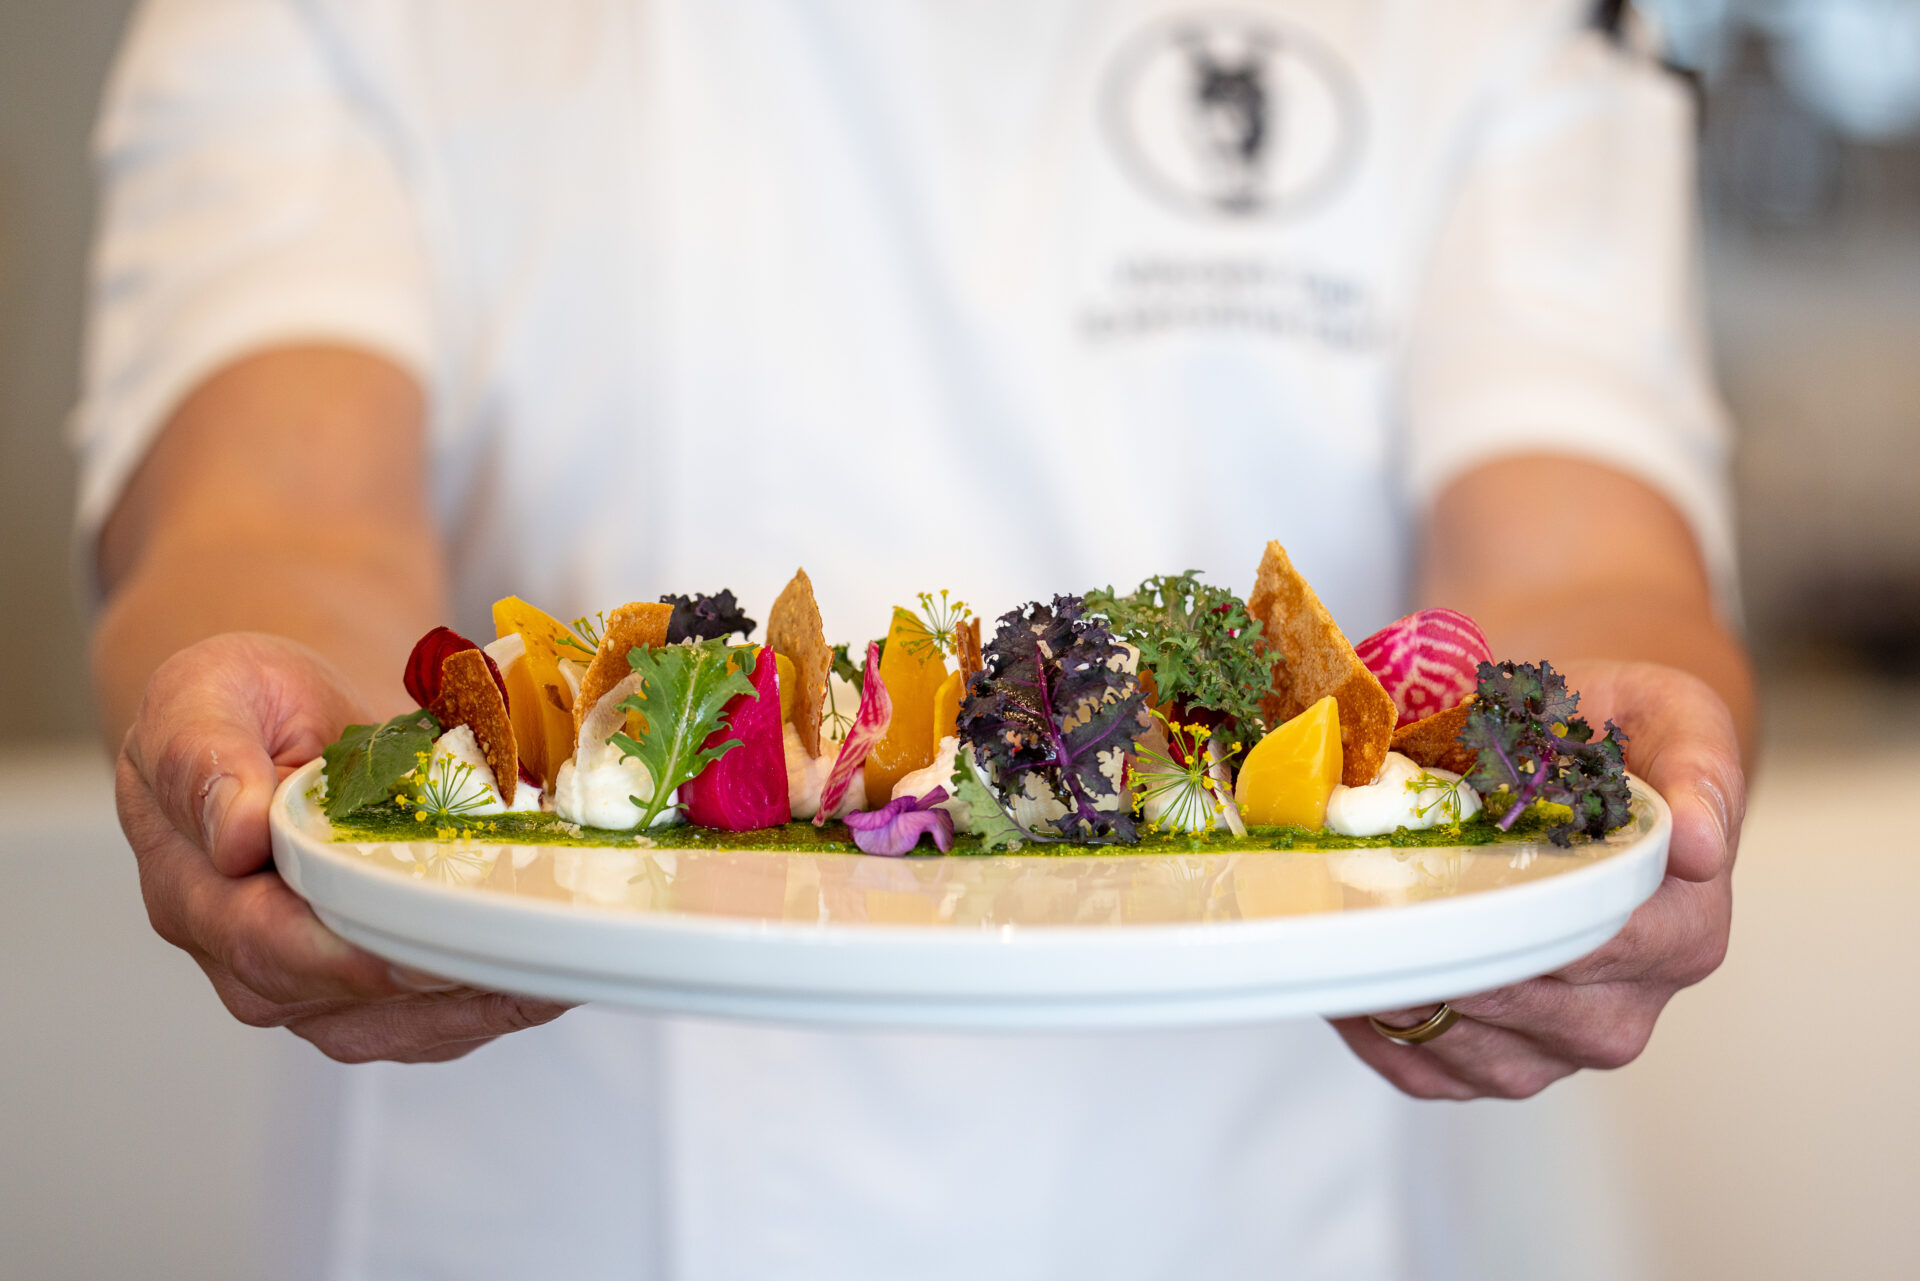 Chef holding a plate of food from Stirrups Restaurant at The Equestrian Hotel in Ocala, Florida.